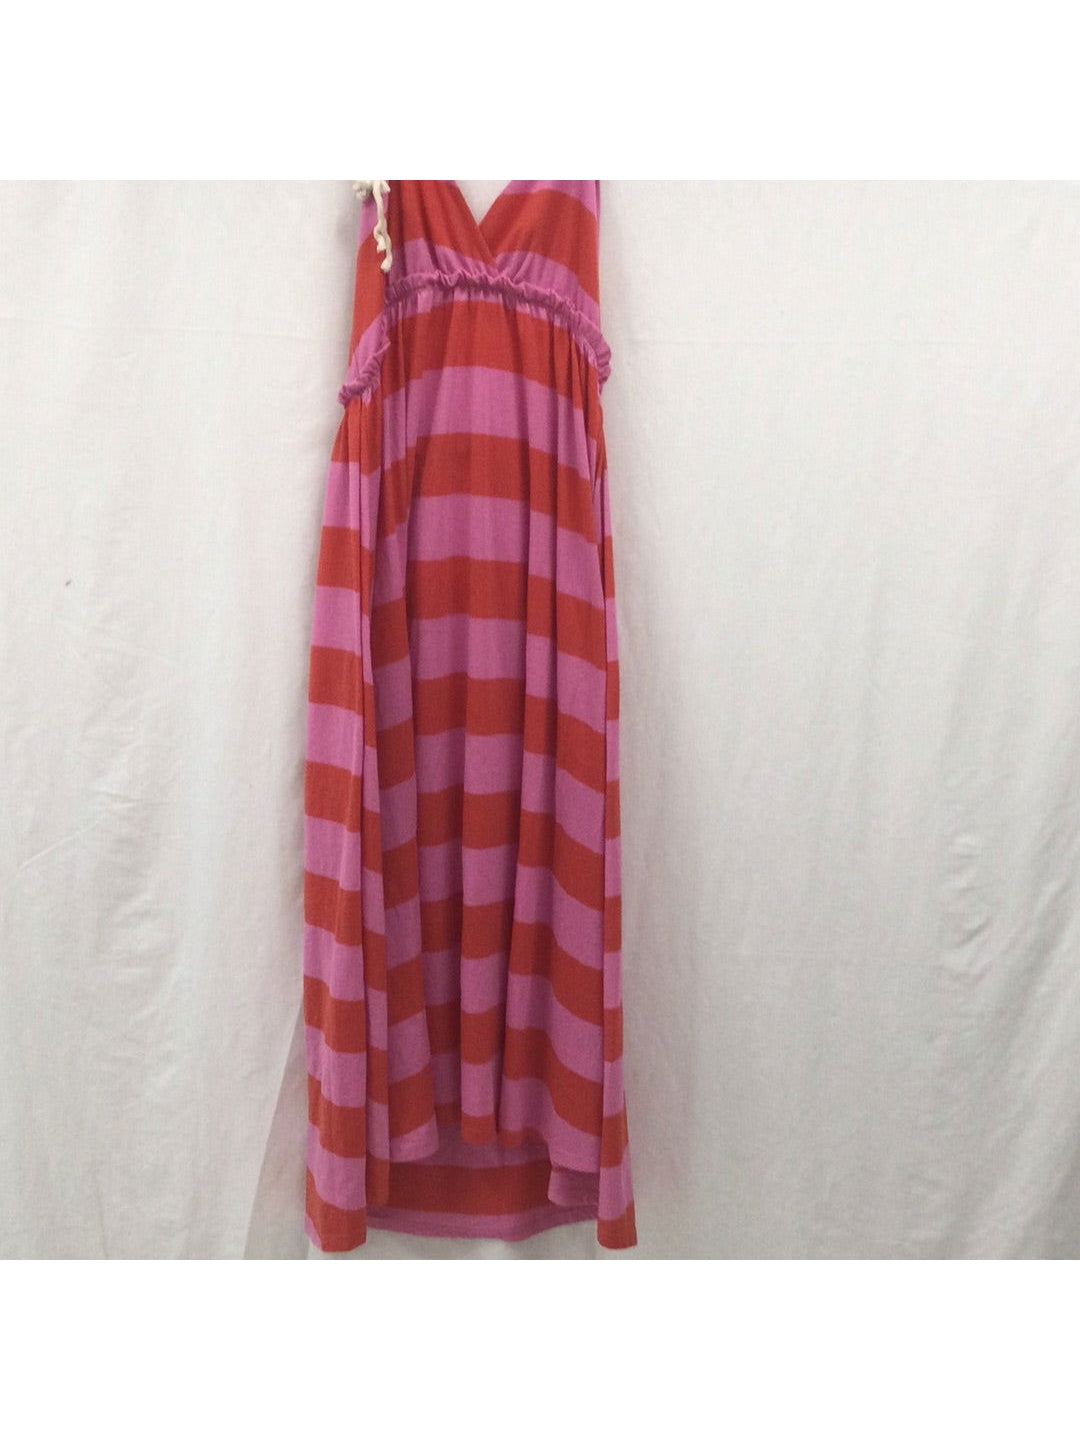 H&M Ladies Pink and Red Striped Long Sun Dress - The Kennedy Collective Thrift - 